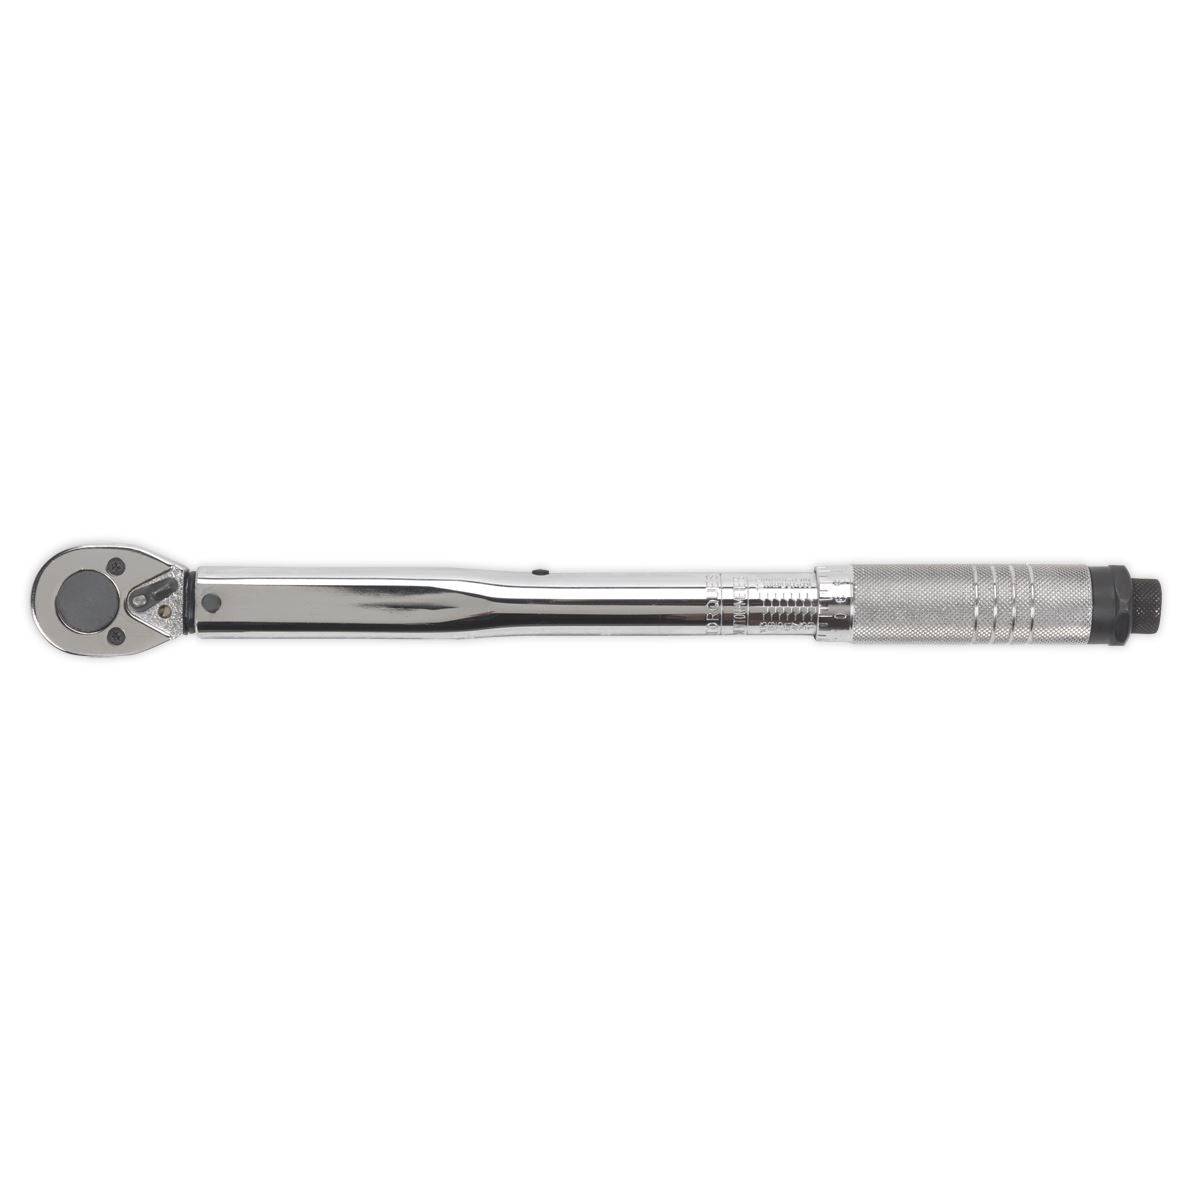 Siegen by Sealey Torque Wrench 3/8"Sq Drive